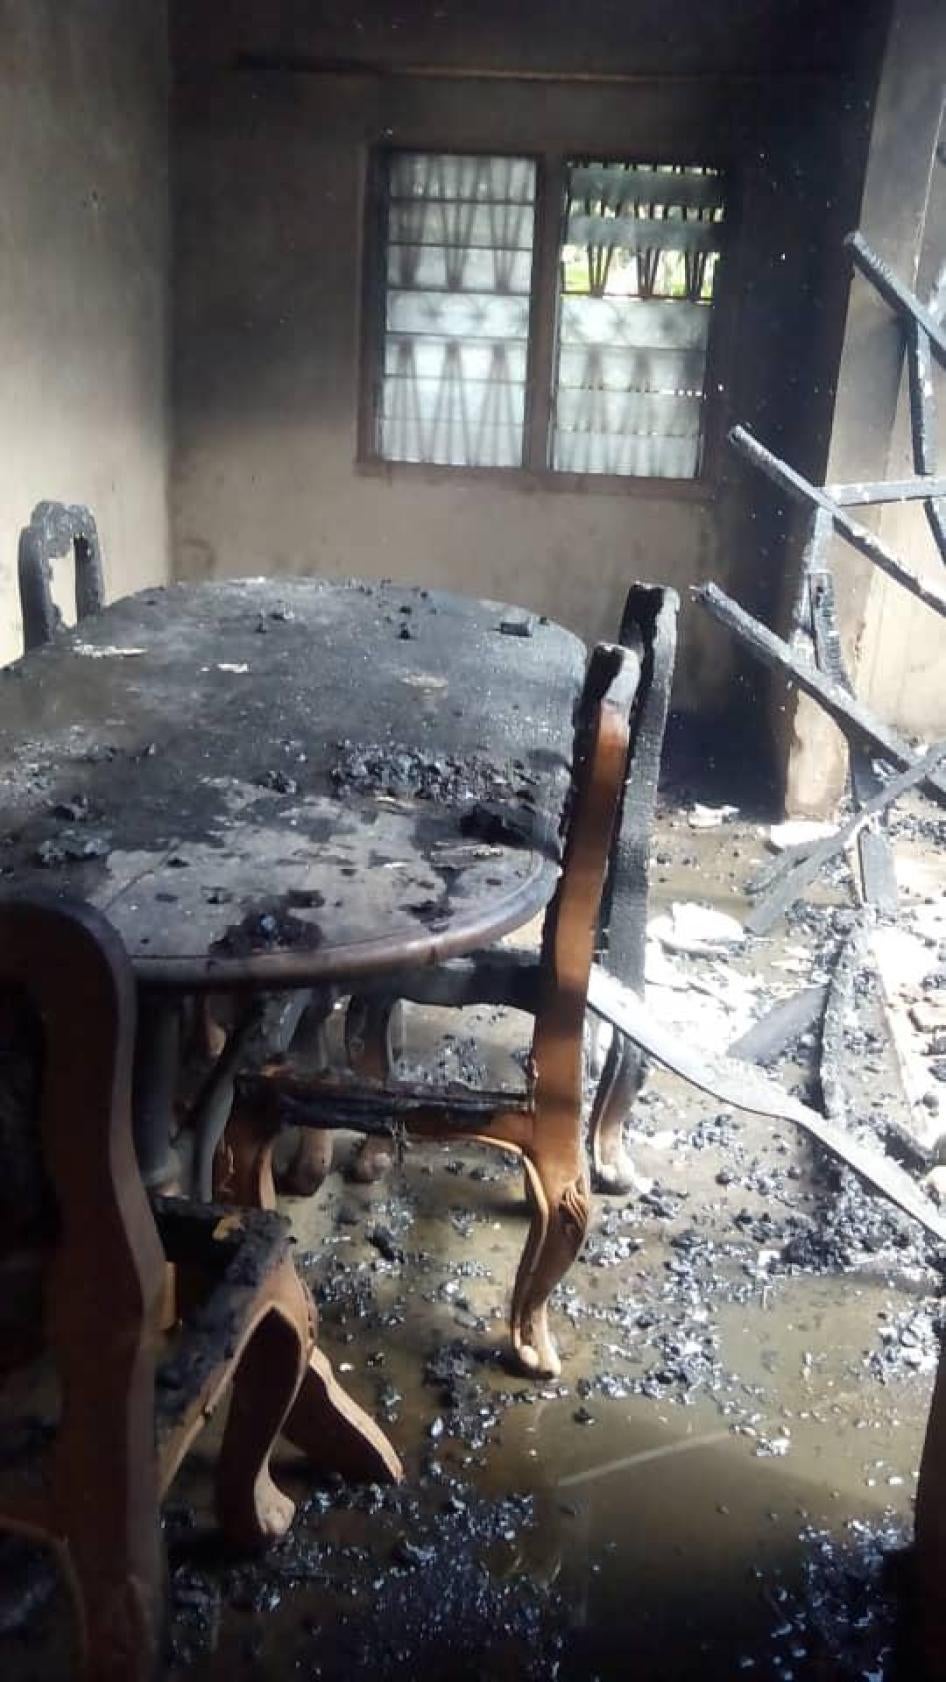 Inside one of the homes burned by the military on October 29, 2019 in Muchweni village, North-West region.